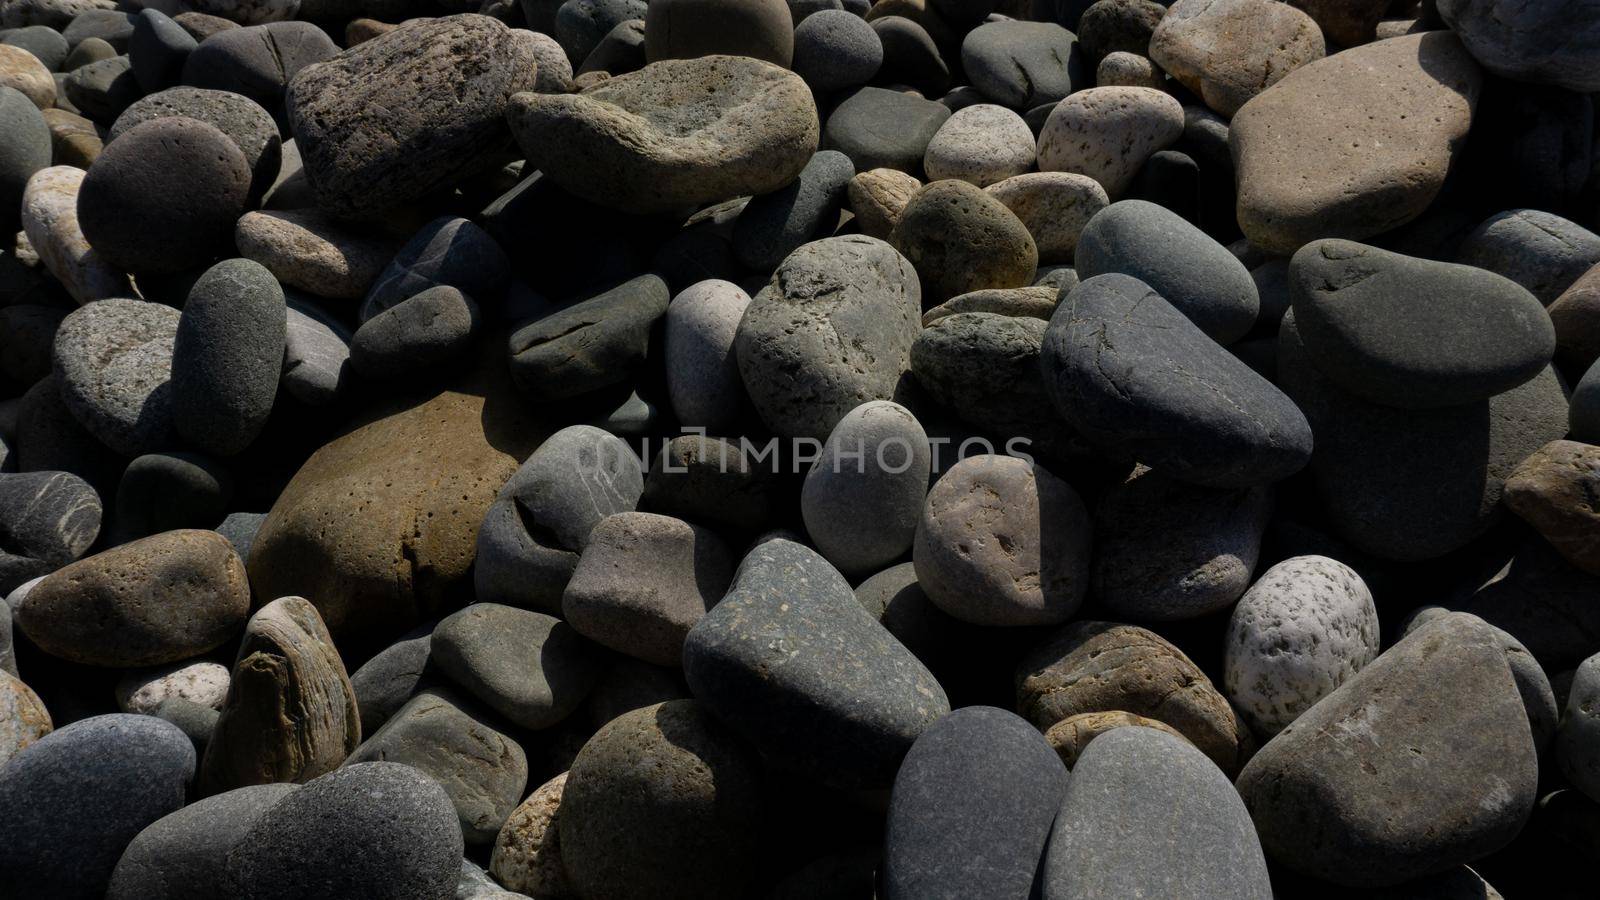 Sea stones background with small pebbles or stone in garden or in the seaside or on a beach. Close up view of rounded smooth polished pebble stones.